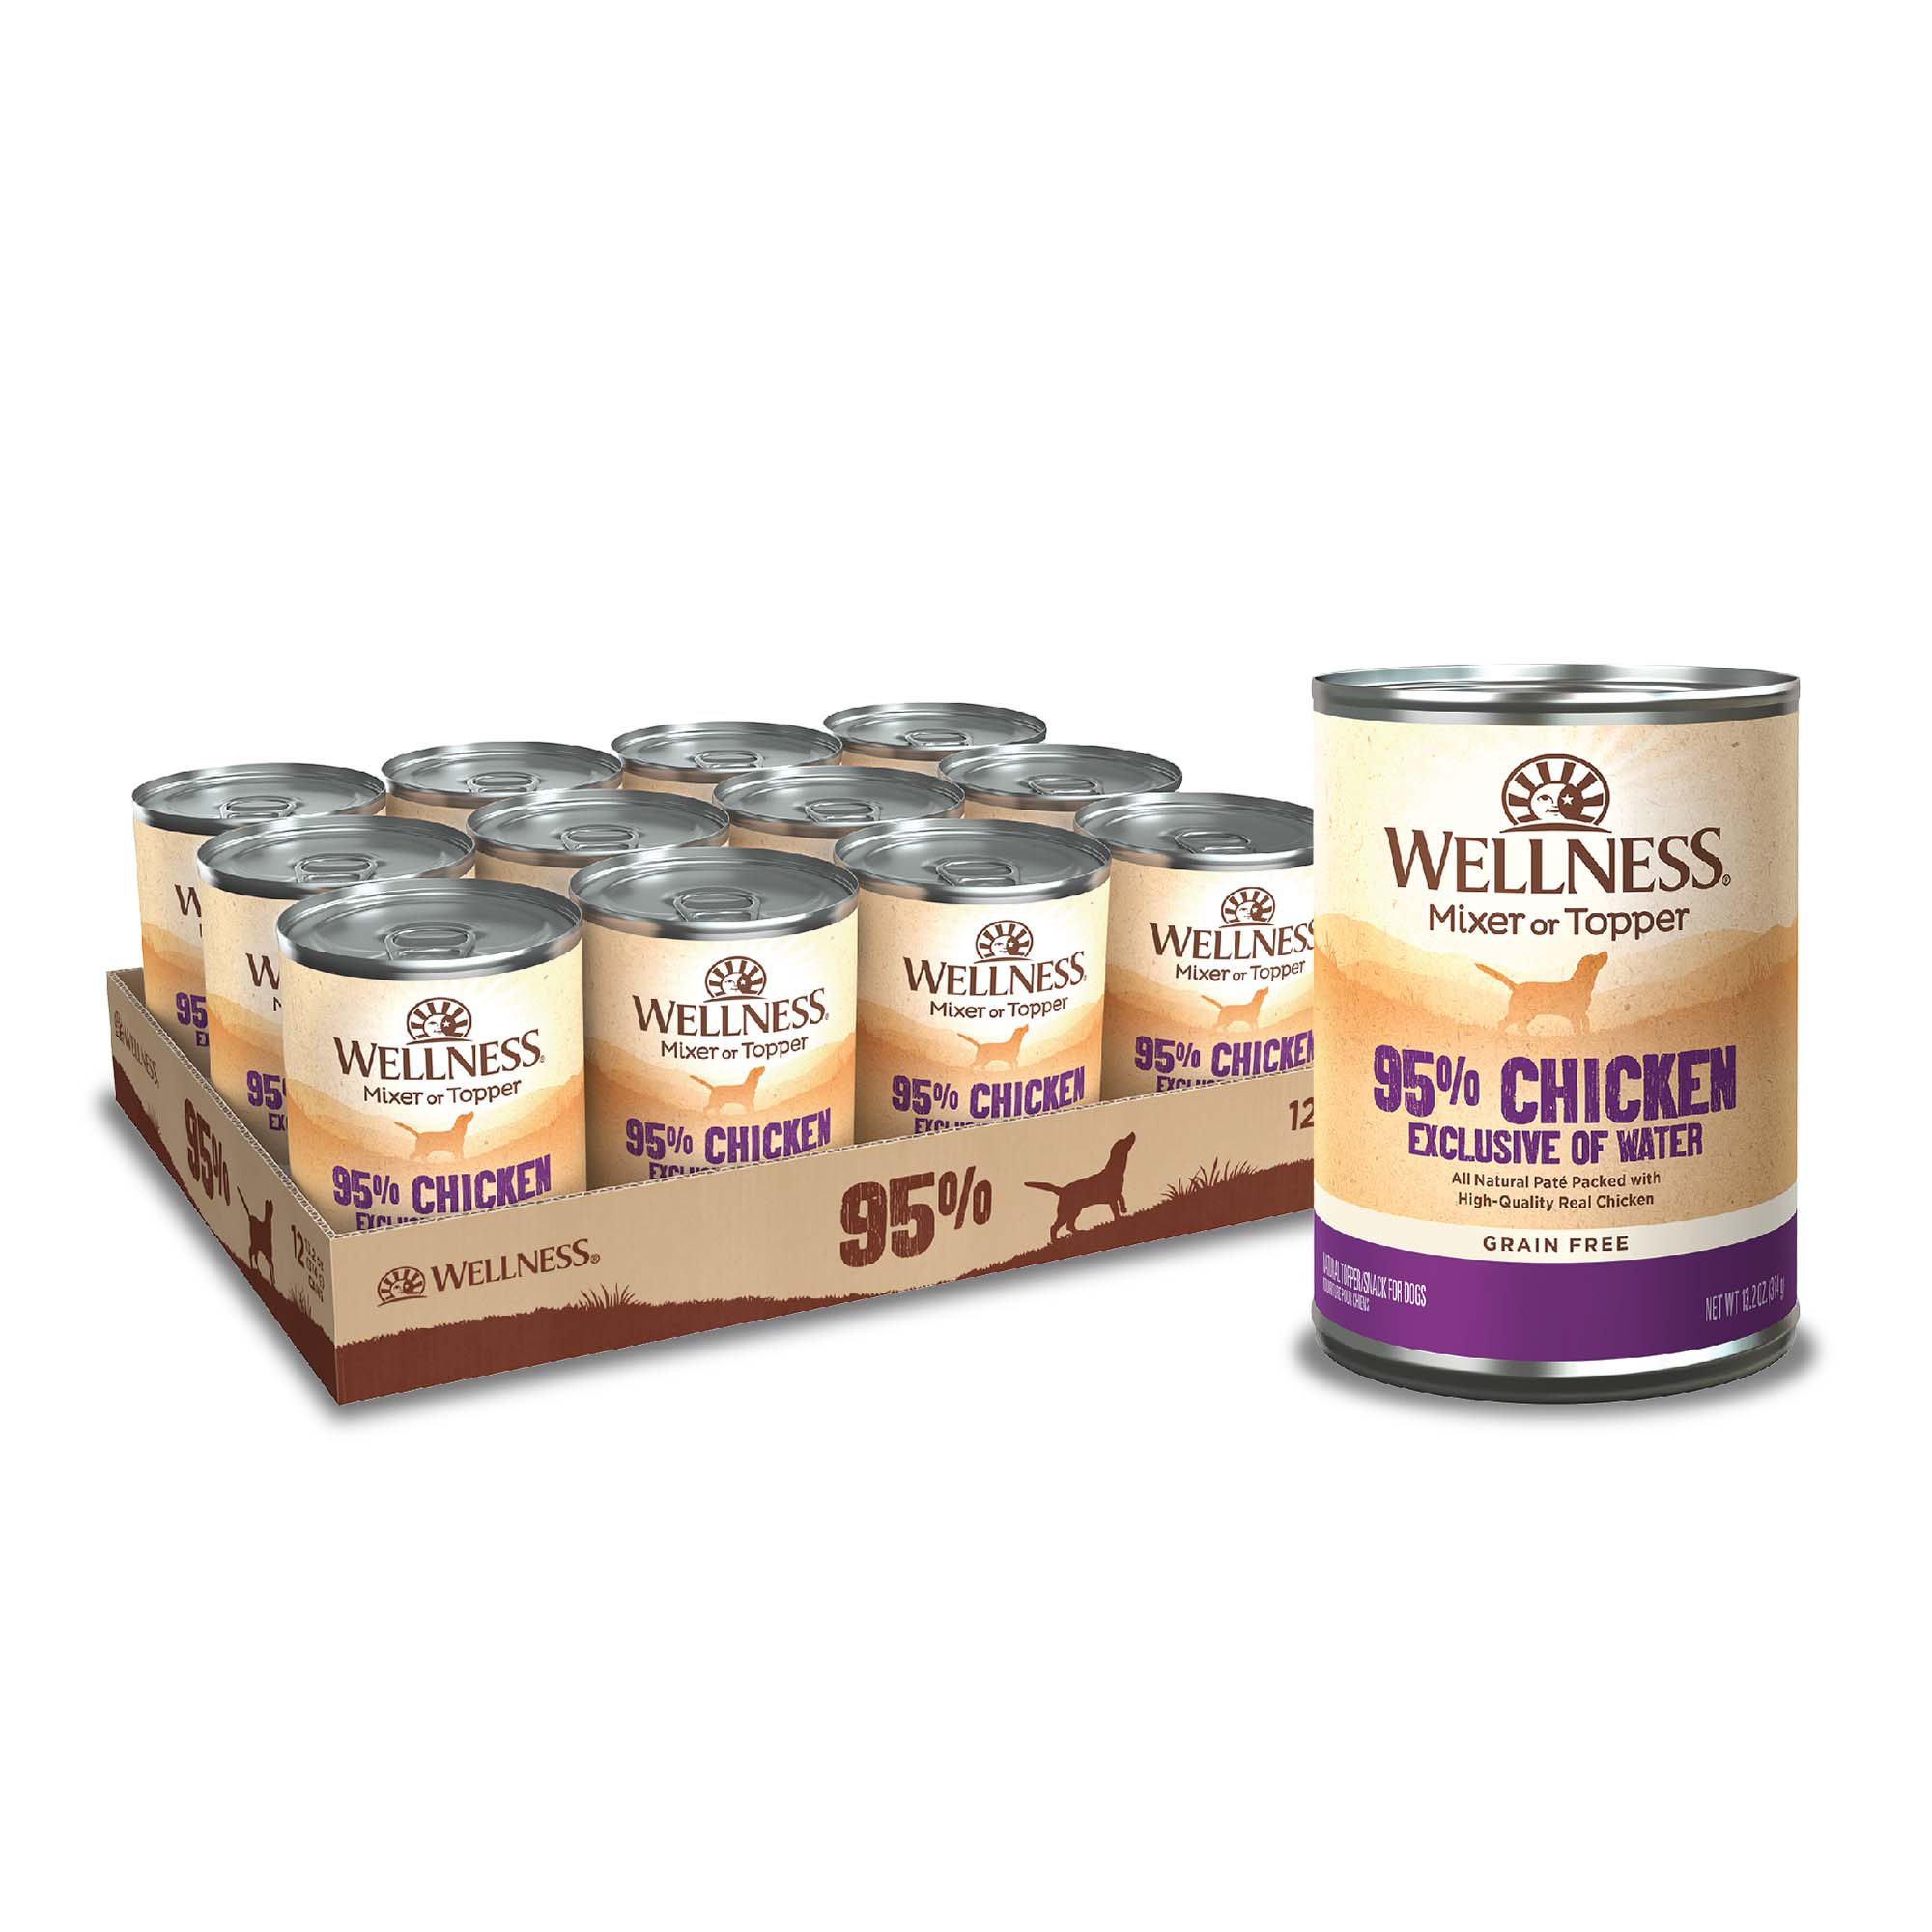 Wellness 95% Chicken Natural Wet Grain Free Canned Dog Food, 13.2-Ounce Can (Pack of 12) - image 1 of 7